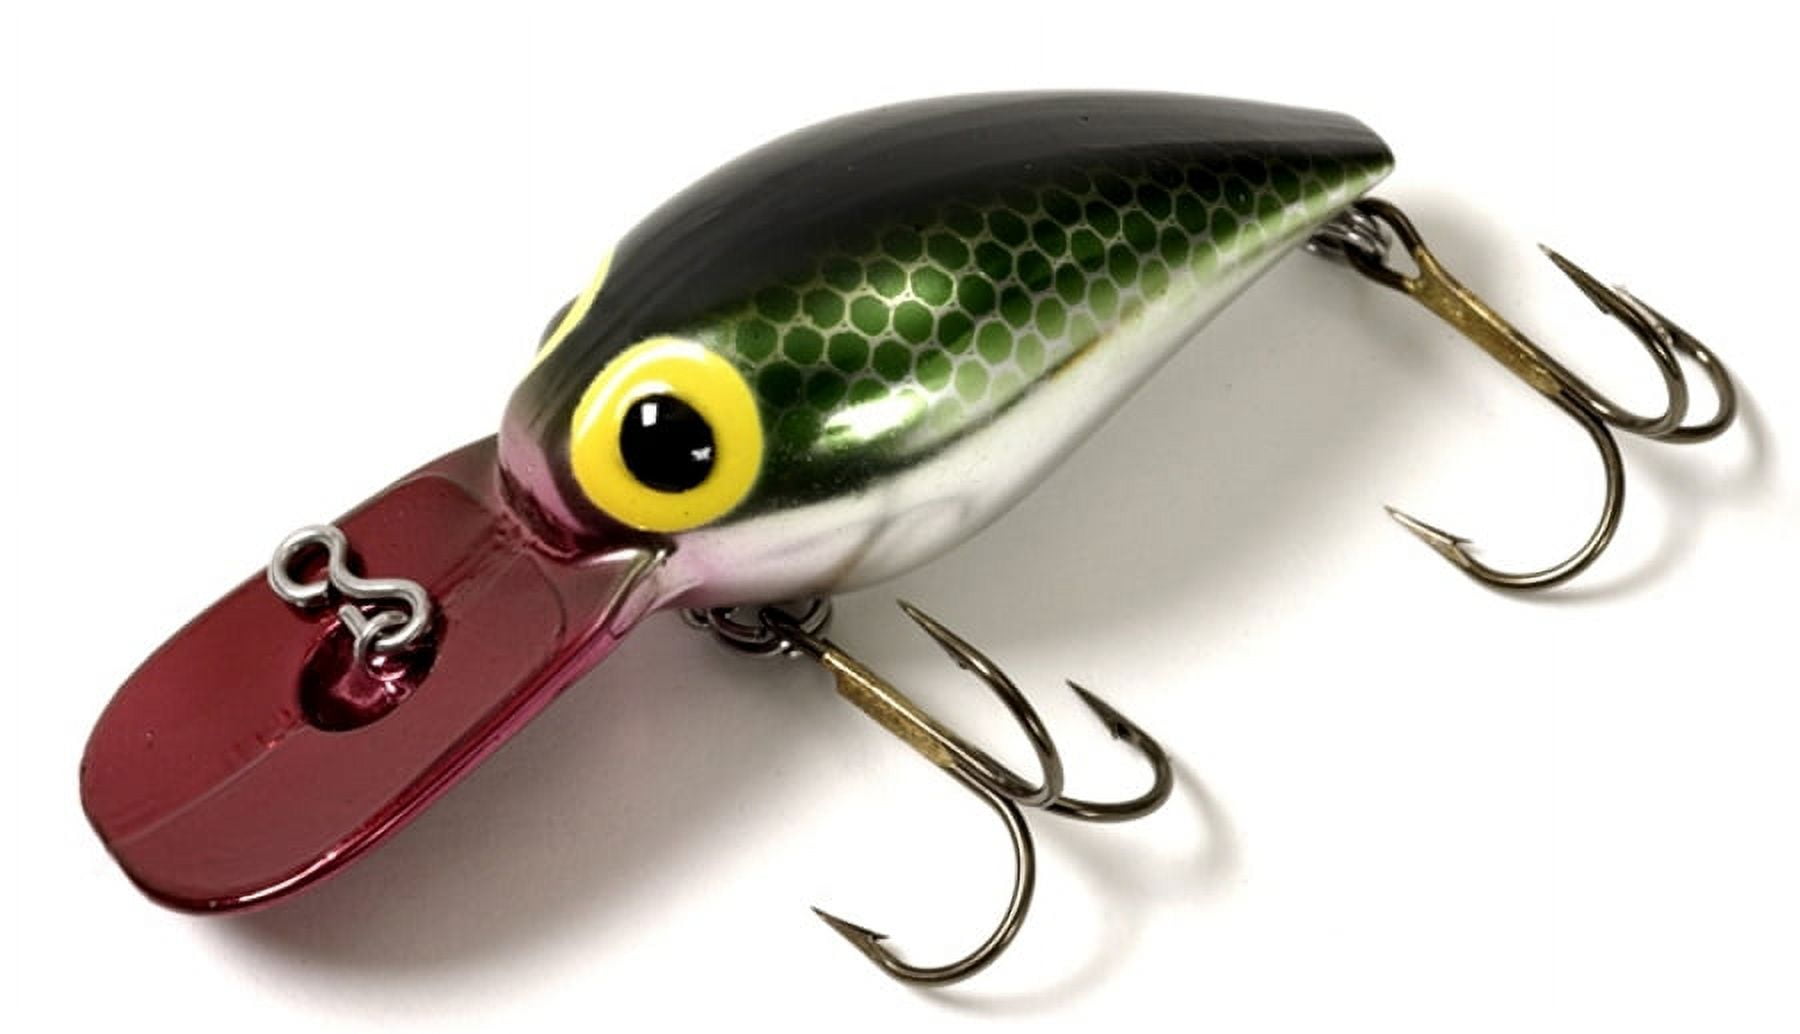  Yakima Bait Wordens Original Rooster Tail Spinner Lure,  Metallic Gold Green Pirate, 1/16-Ounce : Fishing Spinners And Spinnerbaits  : Sports & Outdoors